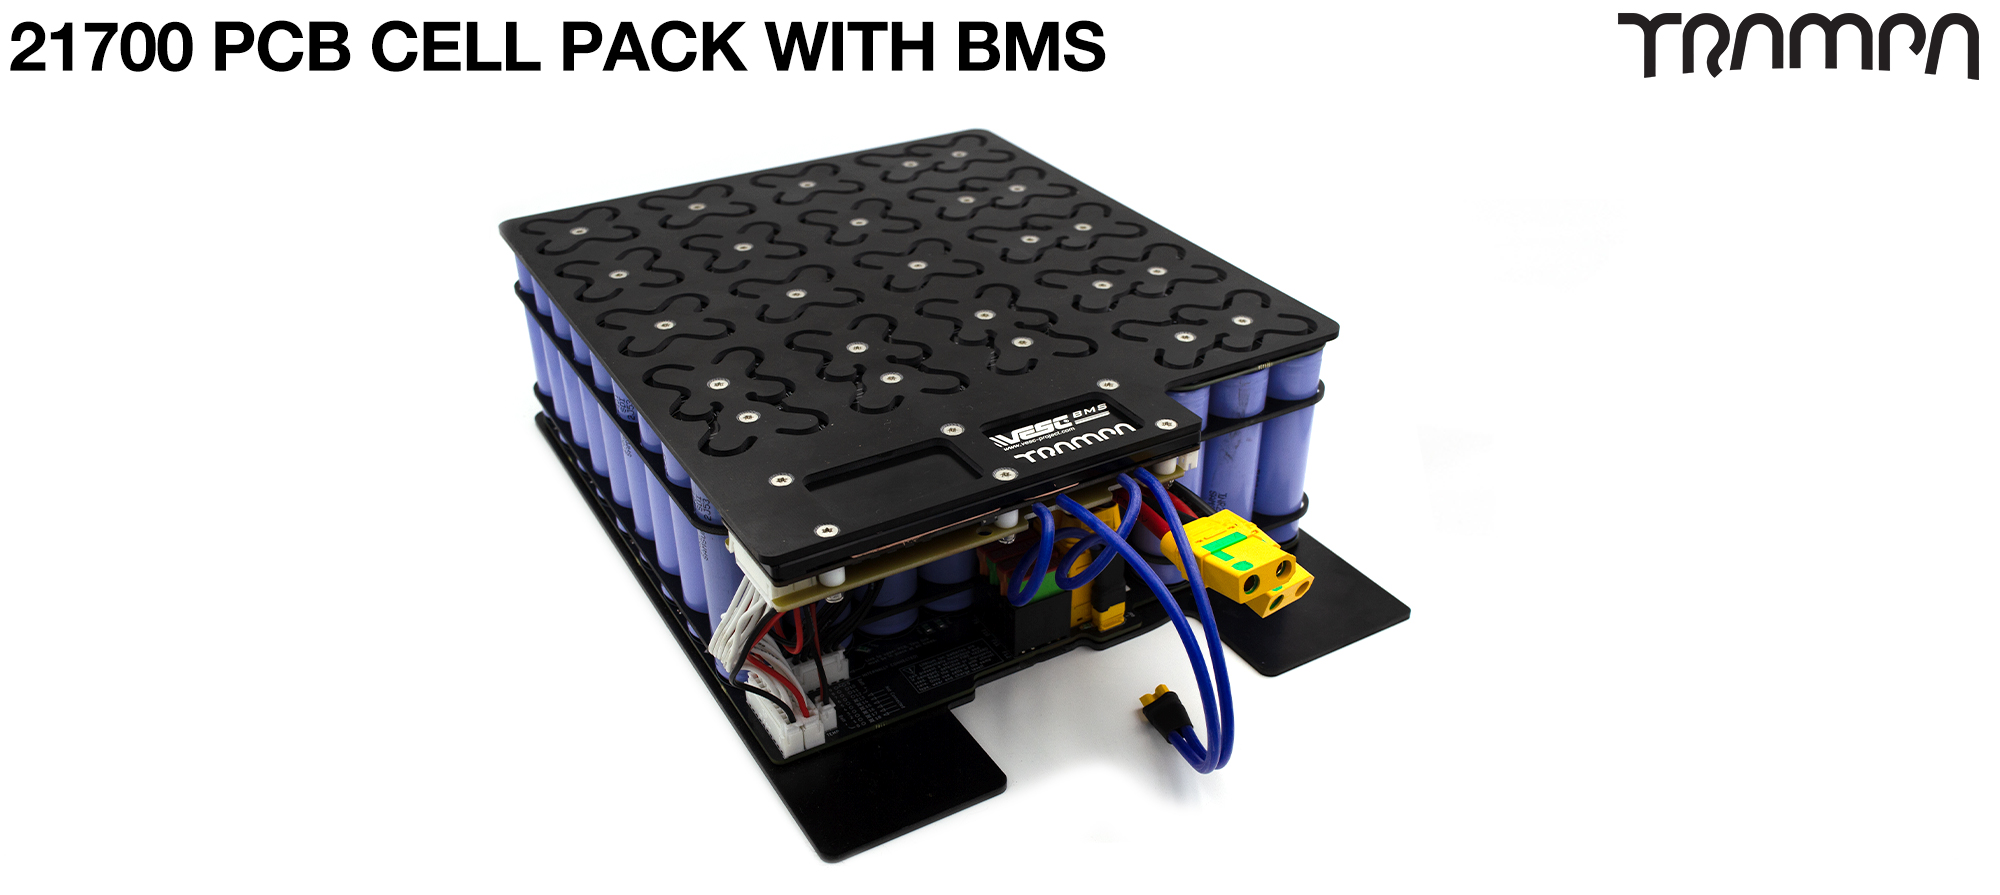 21700 12s7p PCB Cell Pack with BMS fits into the MASSIVE MONSTER box - Holds 84x 21700 cells 12s7p & gives up to 35A of range! 